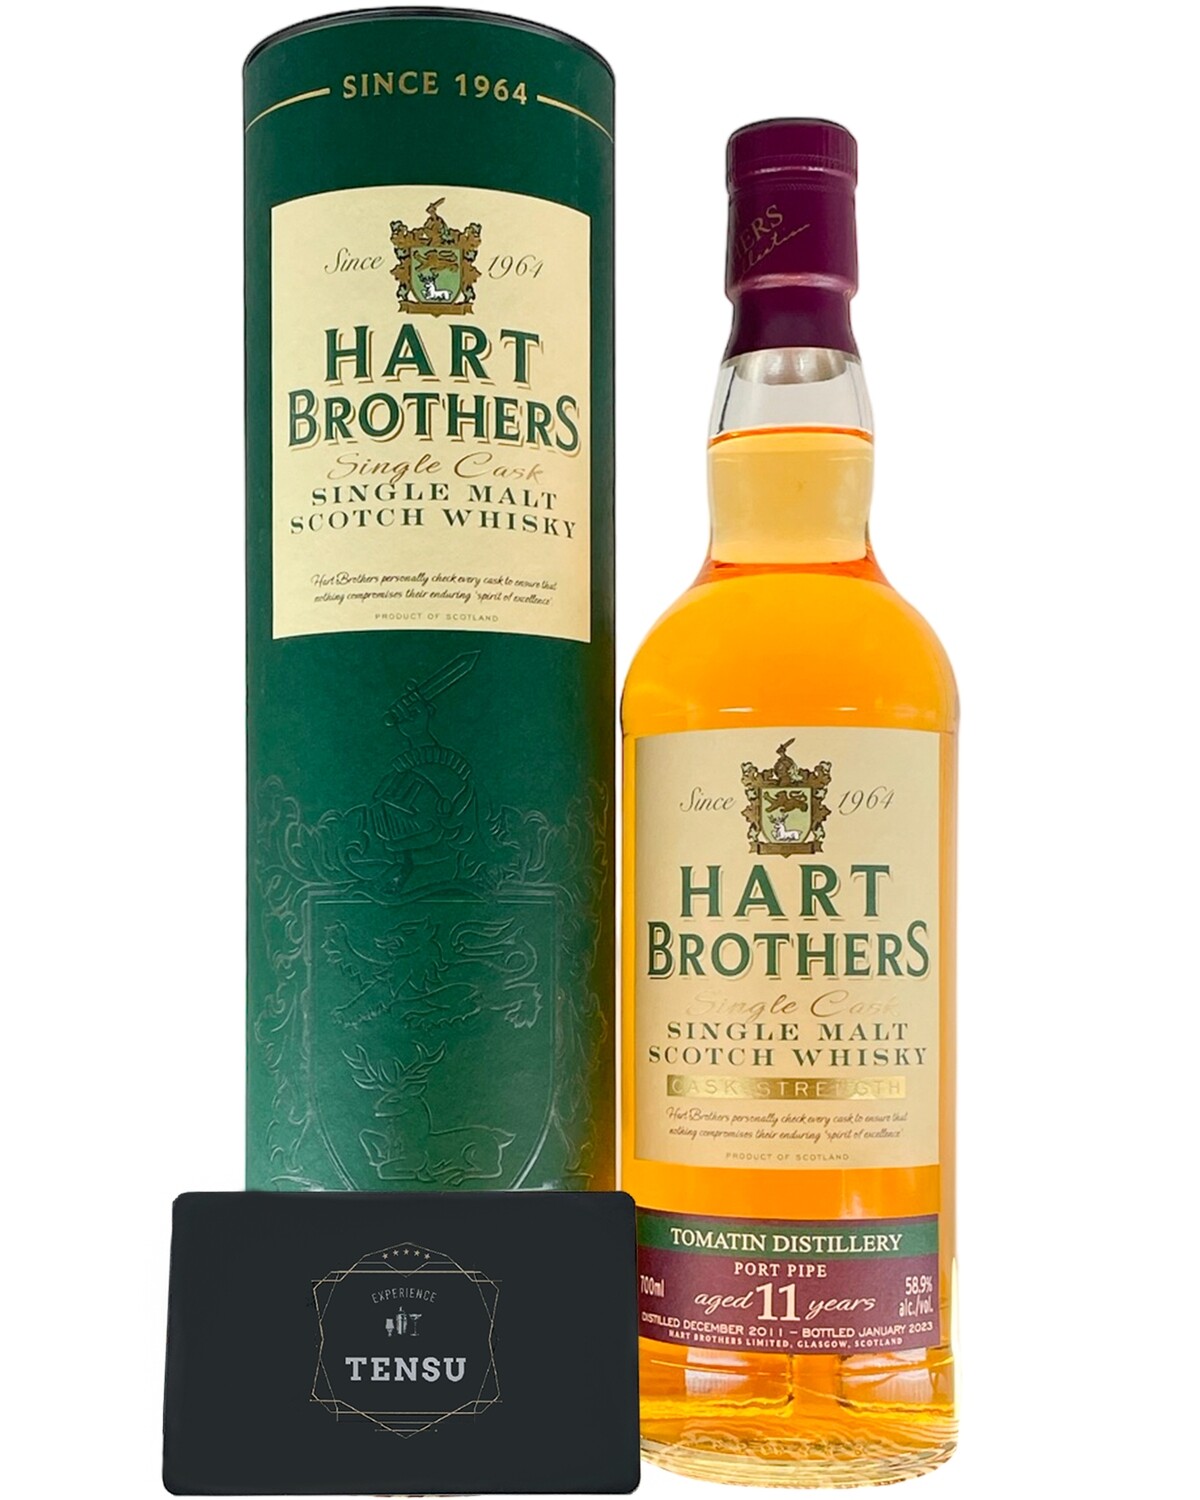 Tomatin 11Y (2011-2023) Port Pipe 58.9 "Hart Brothers"